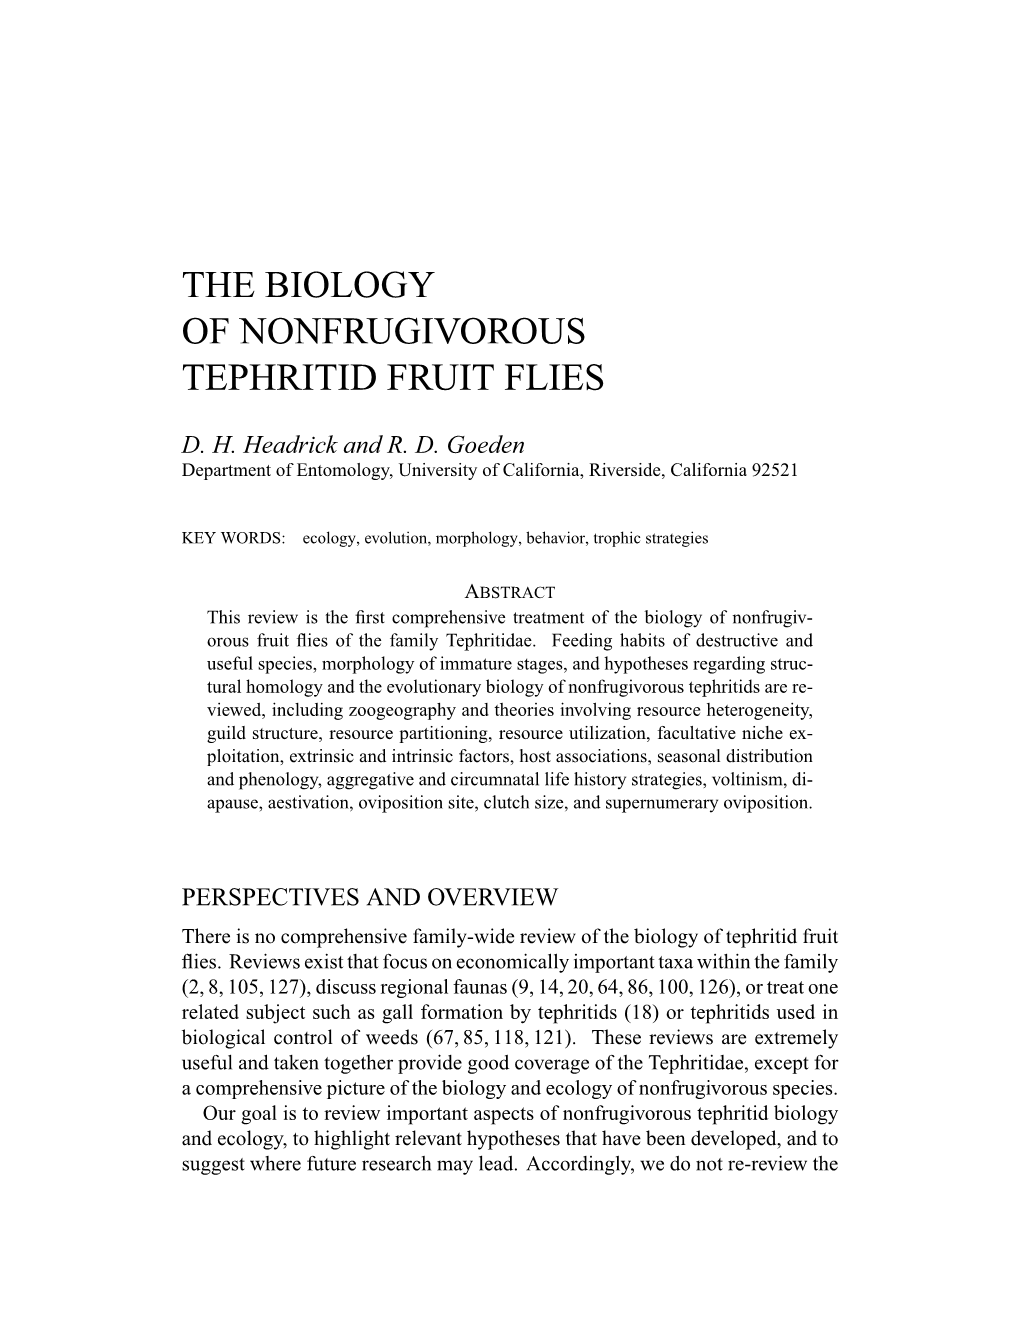 The Biology of Nonfrugivorous Tephritid Fruit Flies